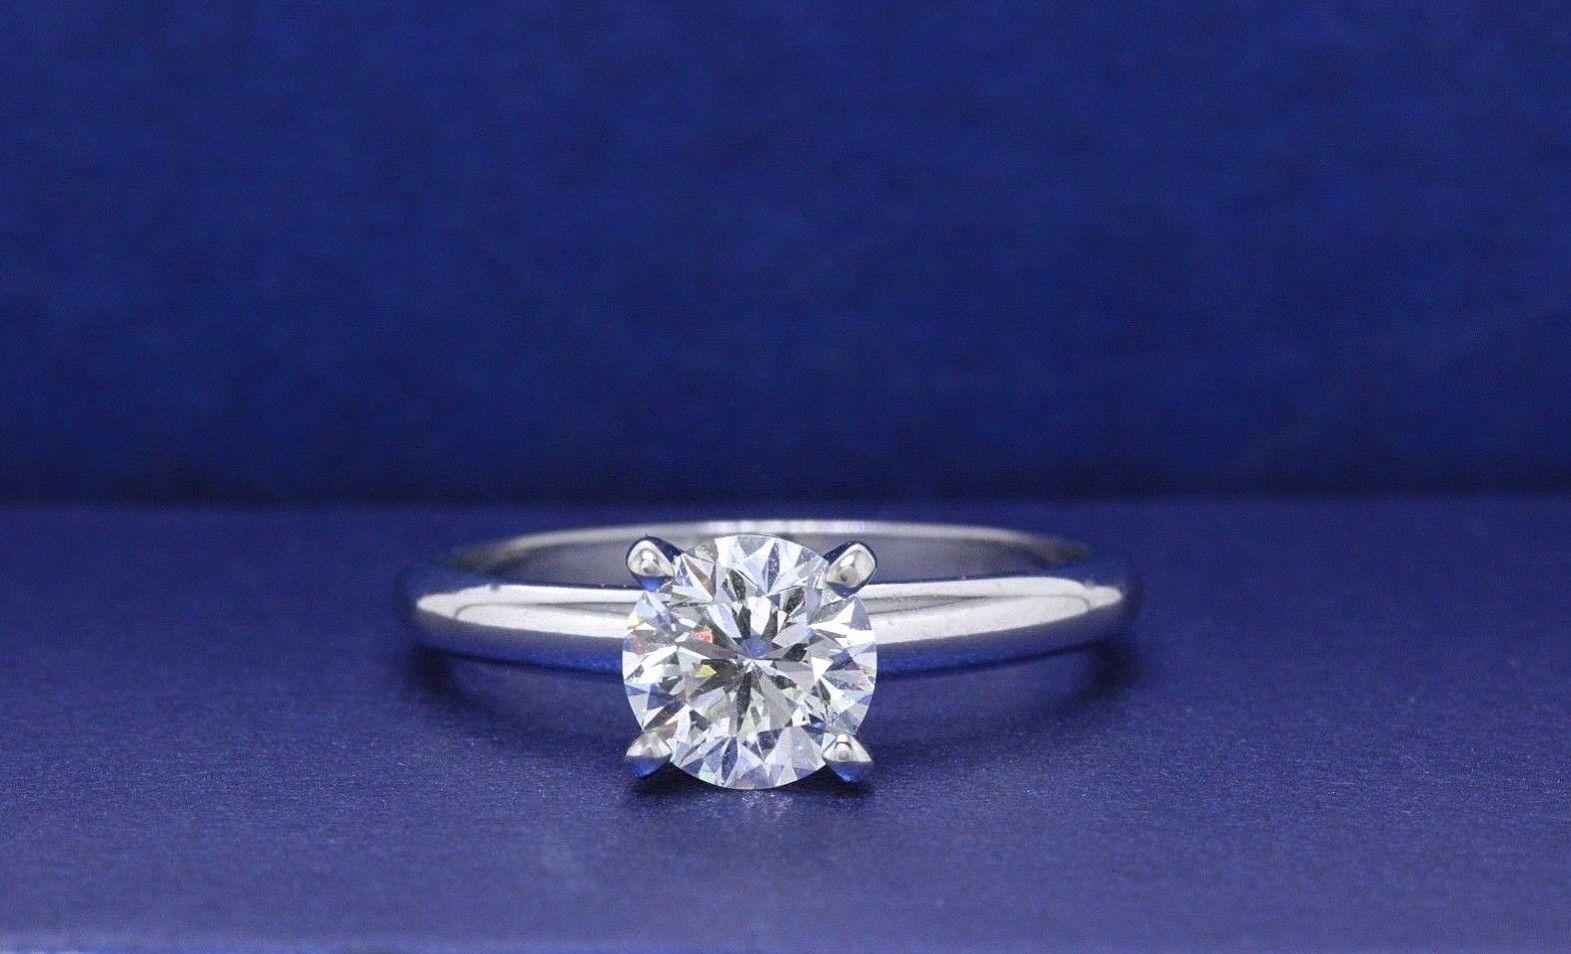 Leo Diamond Solitaire Engagement Ring Round Cut 1.02 CTS I SI2 14K White Gold In Excellent Condition For Sale In San Diego, CA